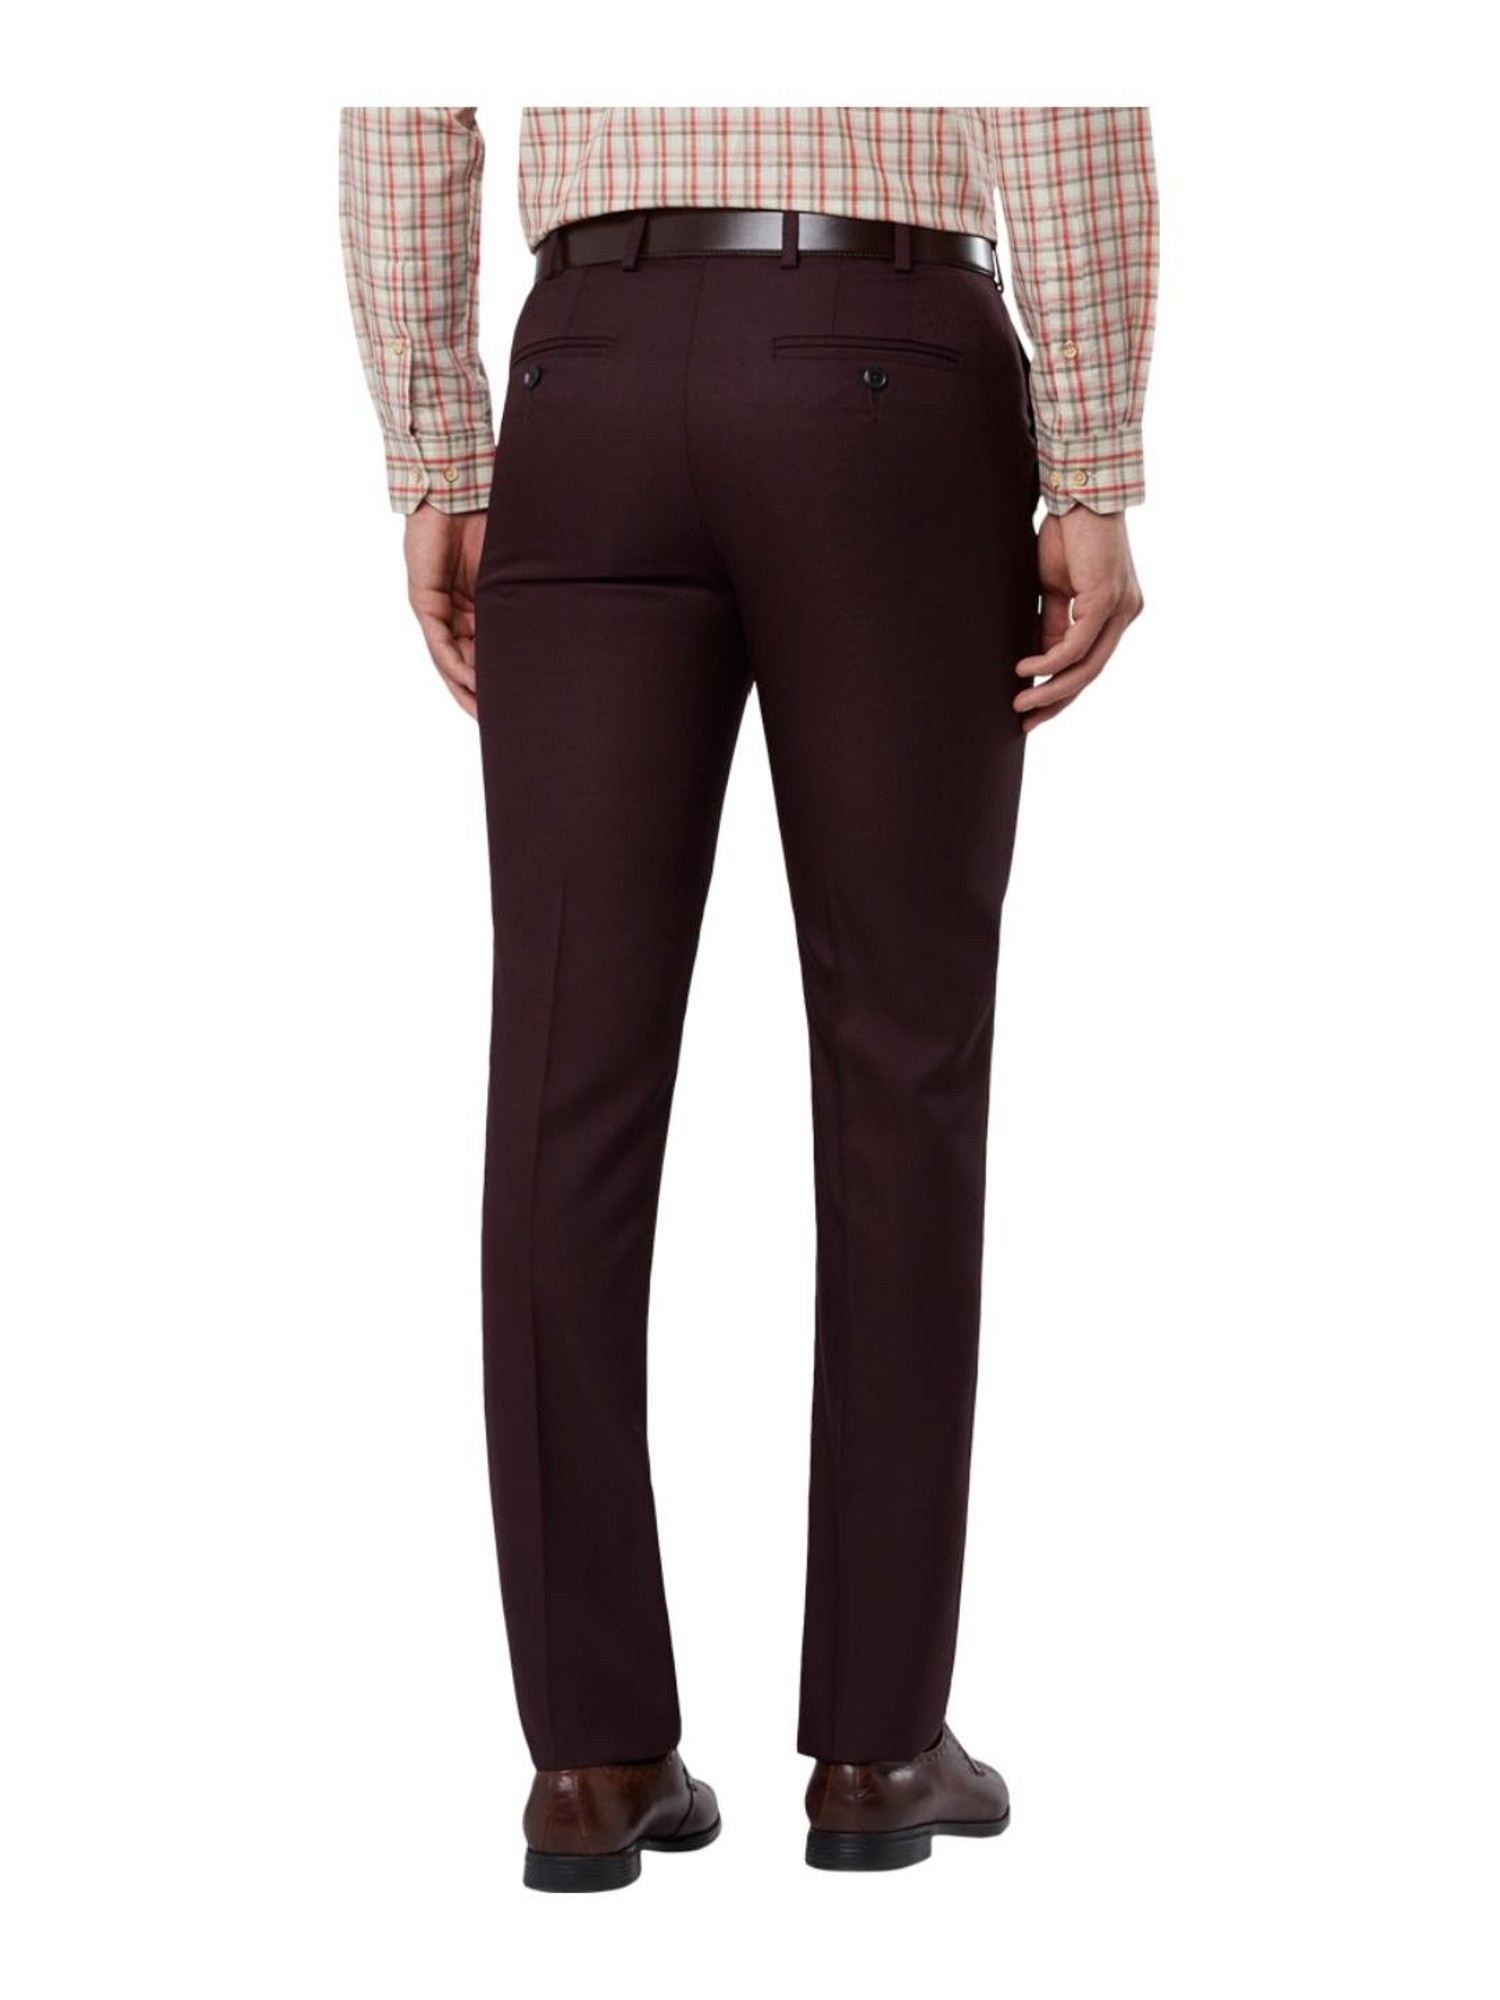 Peter England Formal Trousers  Buy Peter England Men Maroon Solid Slim Fit Formal  Trouser Online  Nykaa Fashion